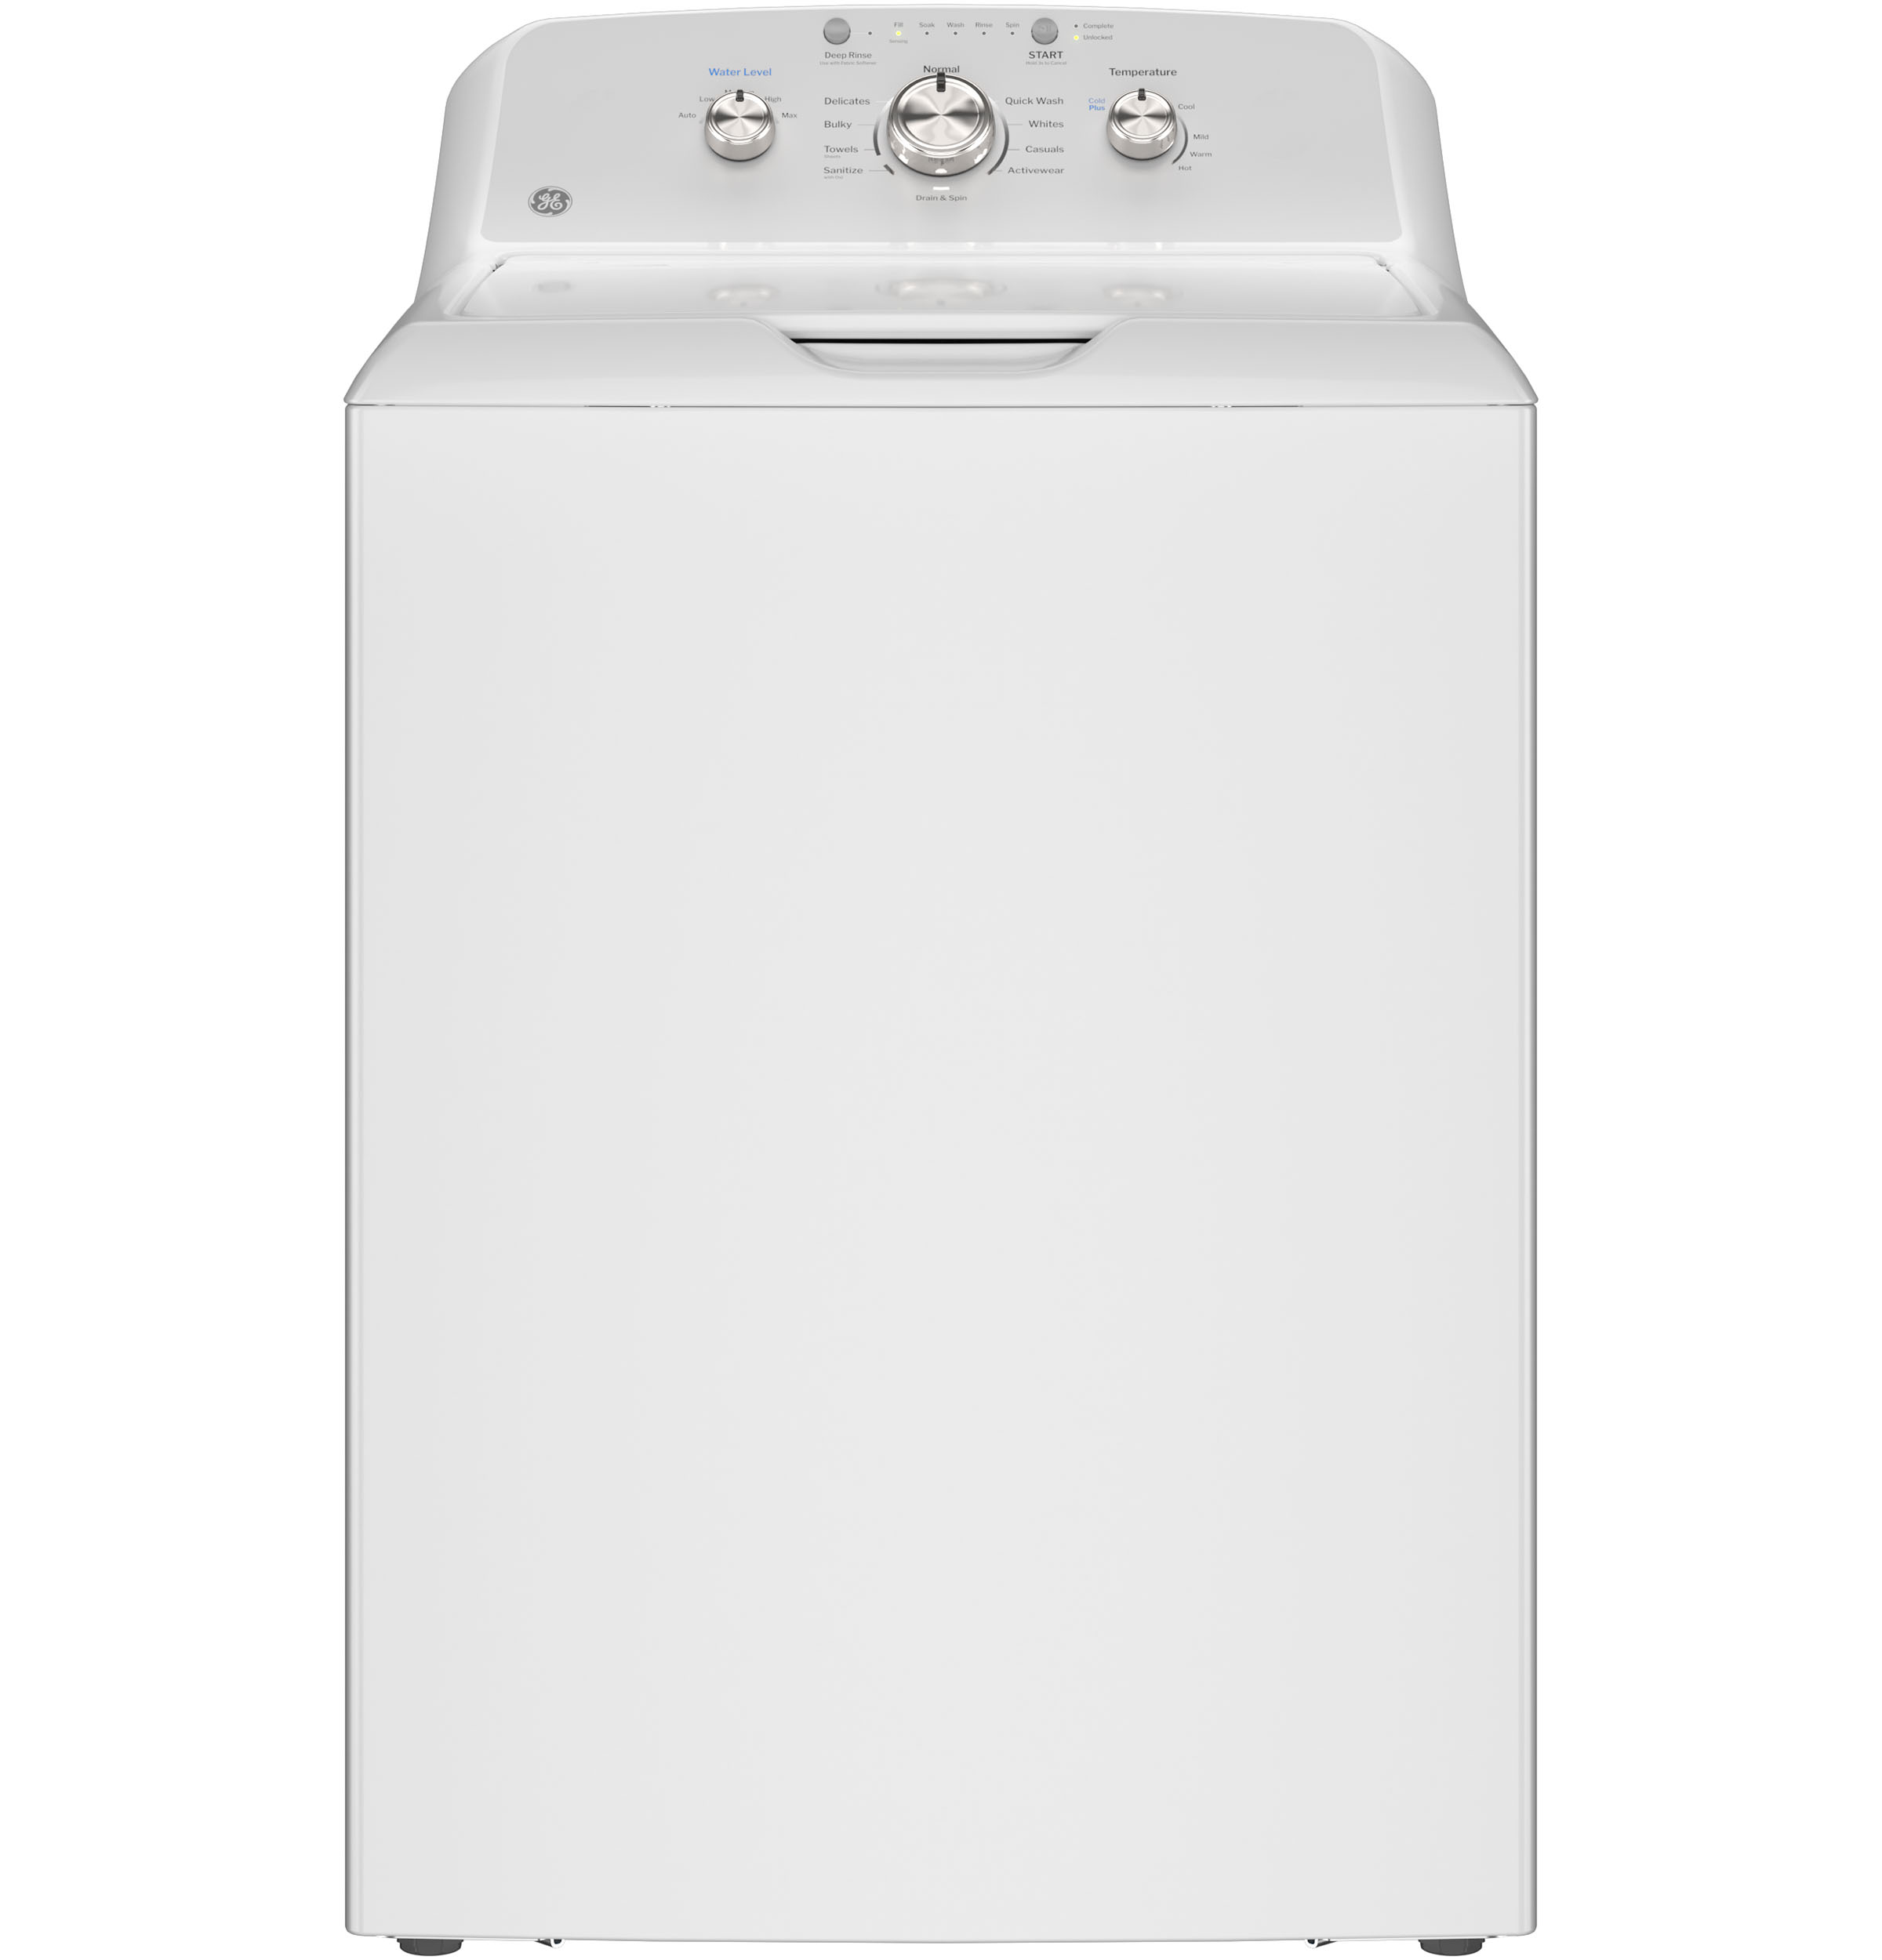 GE® 4.3 cu. ft. Capacity Washer with Stainless Steel Basket,Cold Plus and Water Level Control​